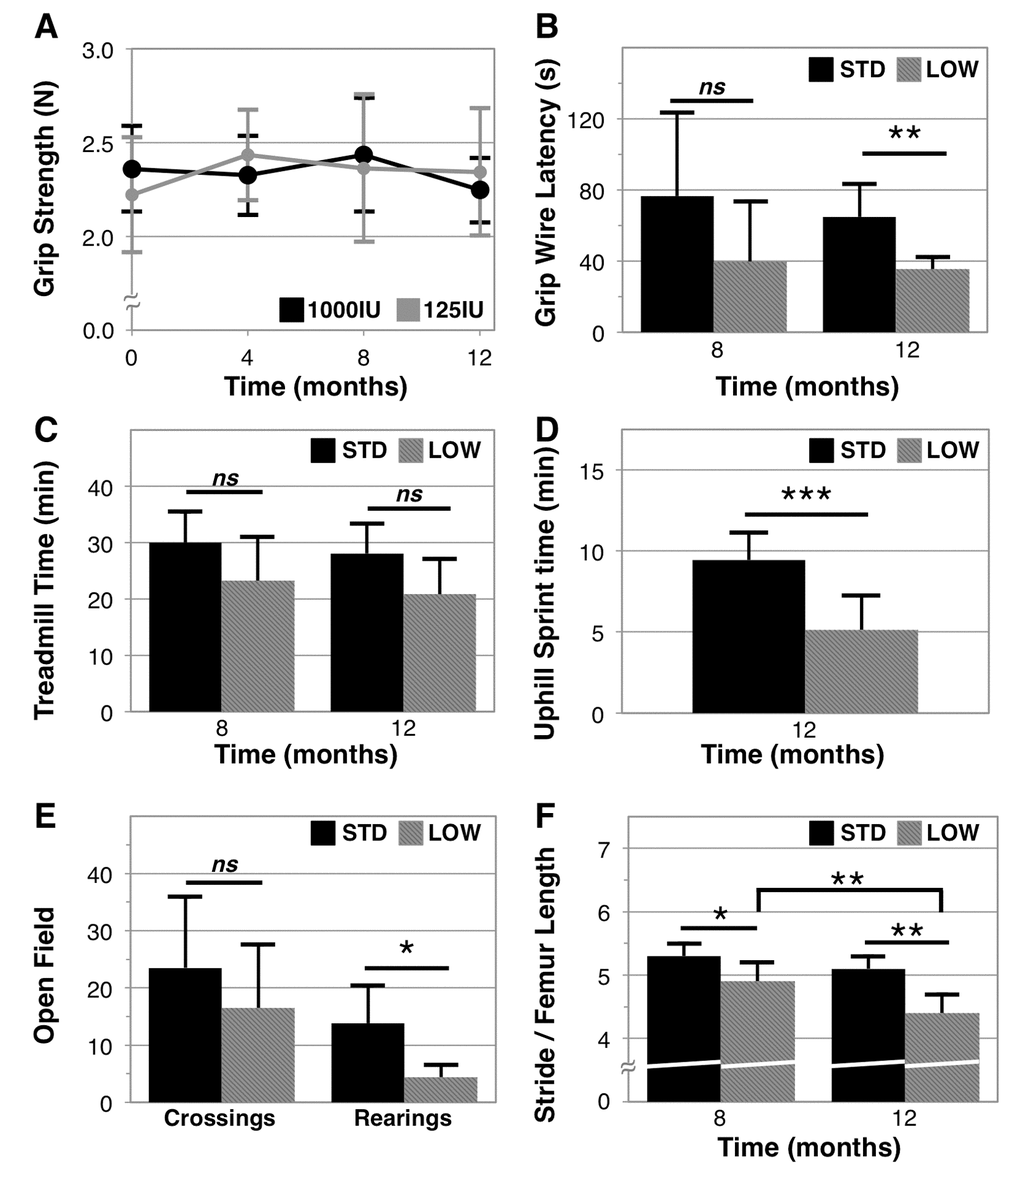 Physical performance in vitamin D sufficient and insufficient mice. Vitamin D sufficient (STD) and insufficient (LOW) mice were assessed across a range of physical performance domains that include: grip strength assessed every 4 months as the best 3 of 5 trials on a grip strength meter, n=6 (A); grip endurance as the best of two trials timed for latency to fall from a wire, n=5 (B); aerobic endurance assessed as a single trial for time before exhaustion on a mouse treadmill, n=6 (C); anaerobic endurance assessed as a single trial of increasing intensity intervals on an inclined (25º) mouse treadmill, n=6, 5 respectively (D); exploratory behavior as a count of quadrant crossings and rearings over 5 minutes in an open field arena, n=6, 5 respectively (E); and gait as assessed by measurement of stride length normalized to femur length determined using dual X-ray absorptiometry, n=5, 6 respectively (F). Statistical significance indicated by “*” p “ns” indicating non‑significance.